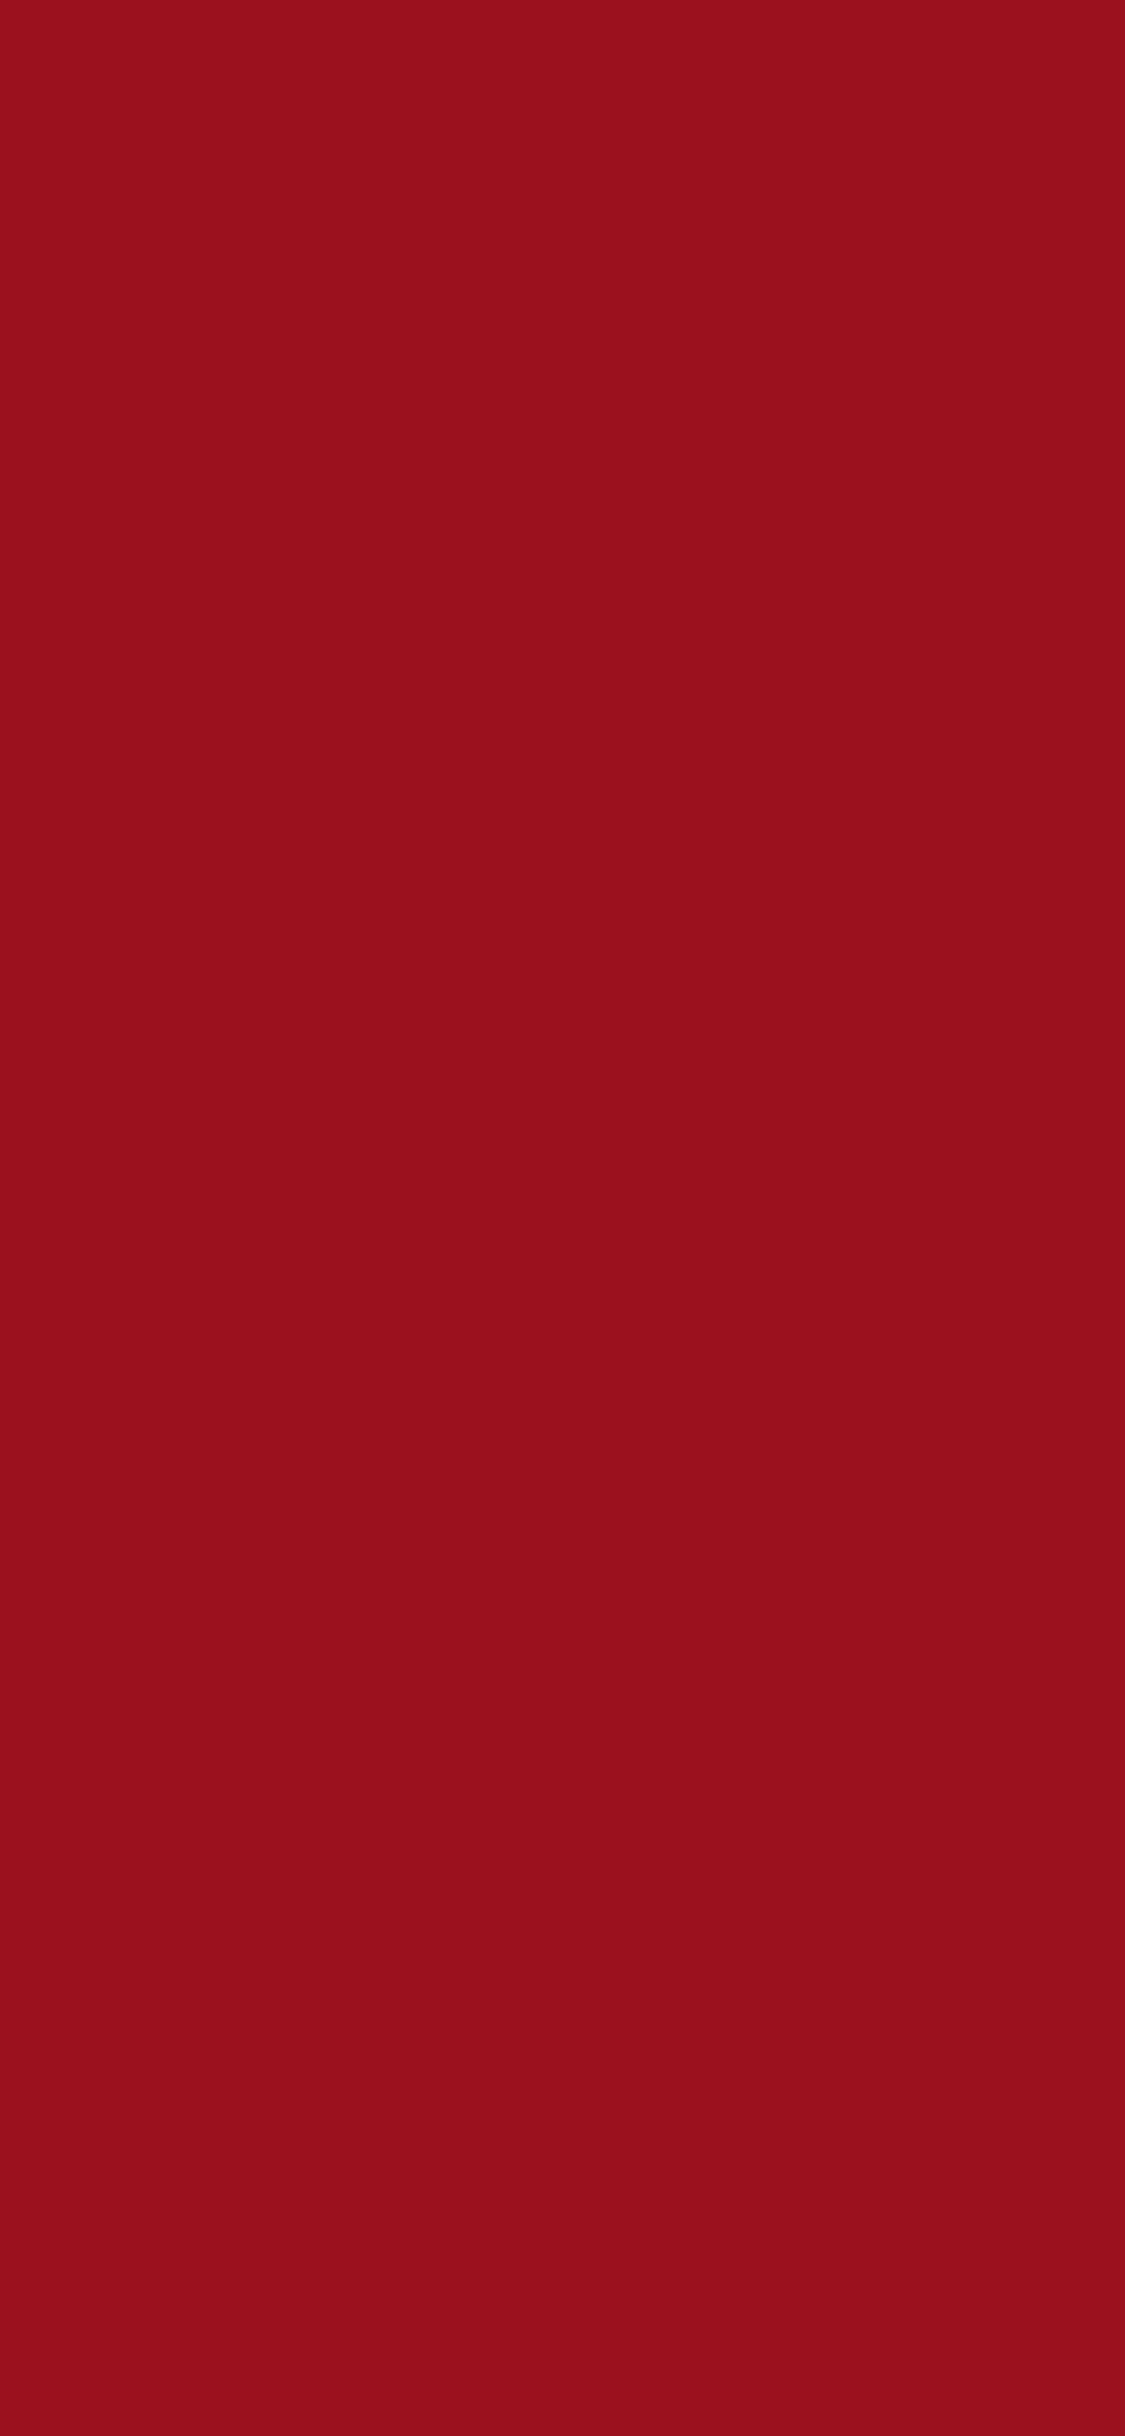 1125x2436 Ruby Red Solid Color Background